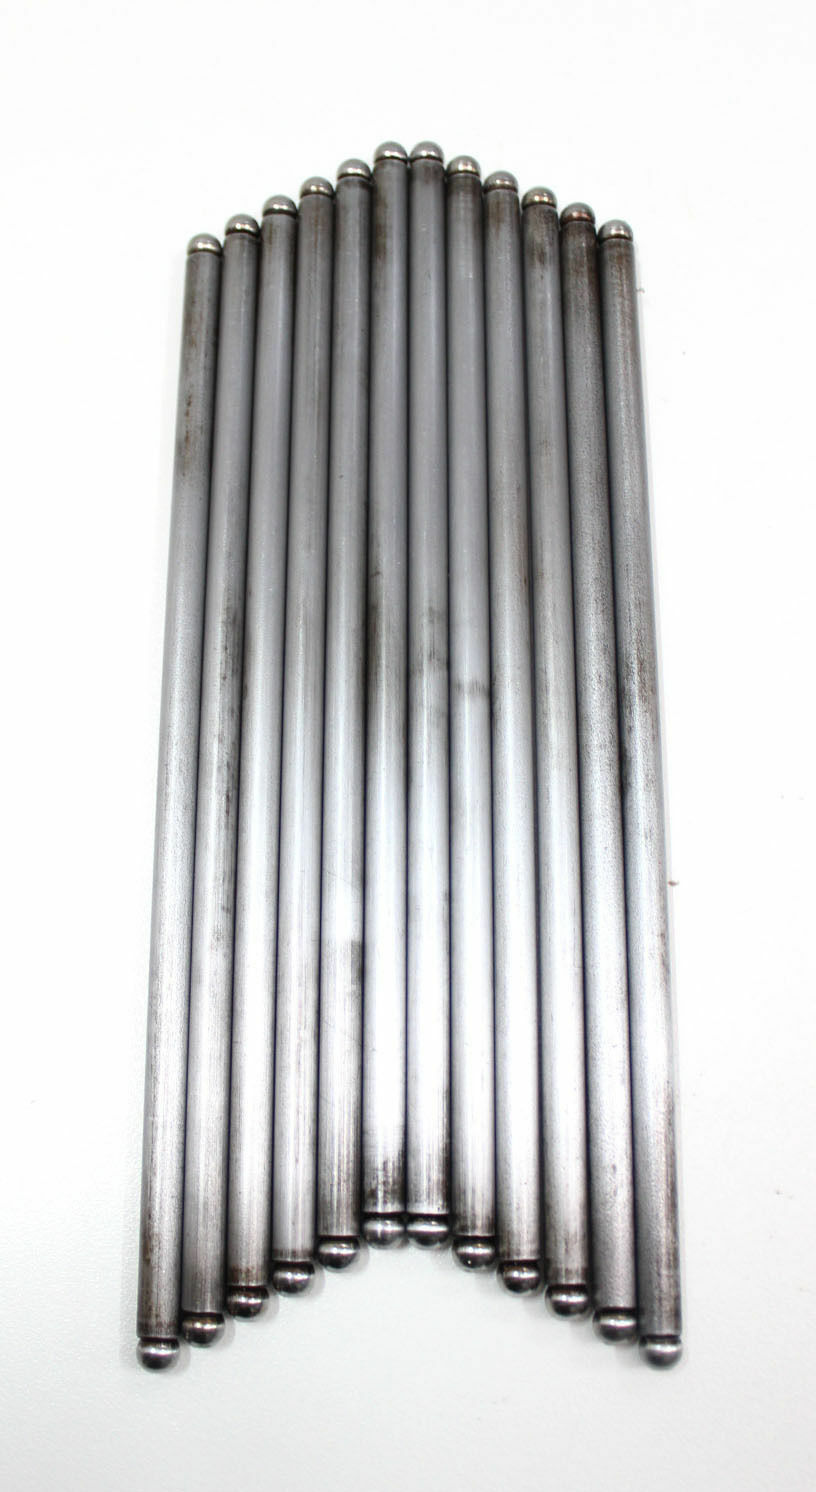 Used VB VC VH VK Push Rod Set Holden Commodore Calais 3.3 Litre 6 Cyl ...